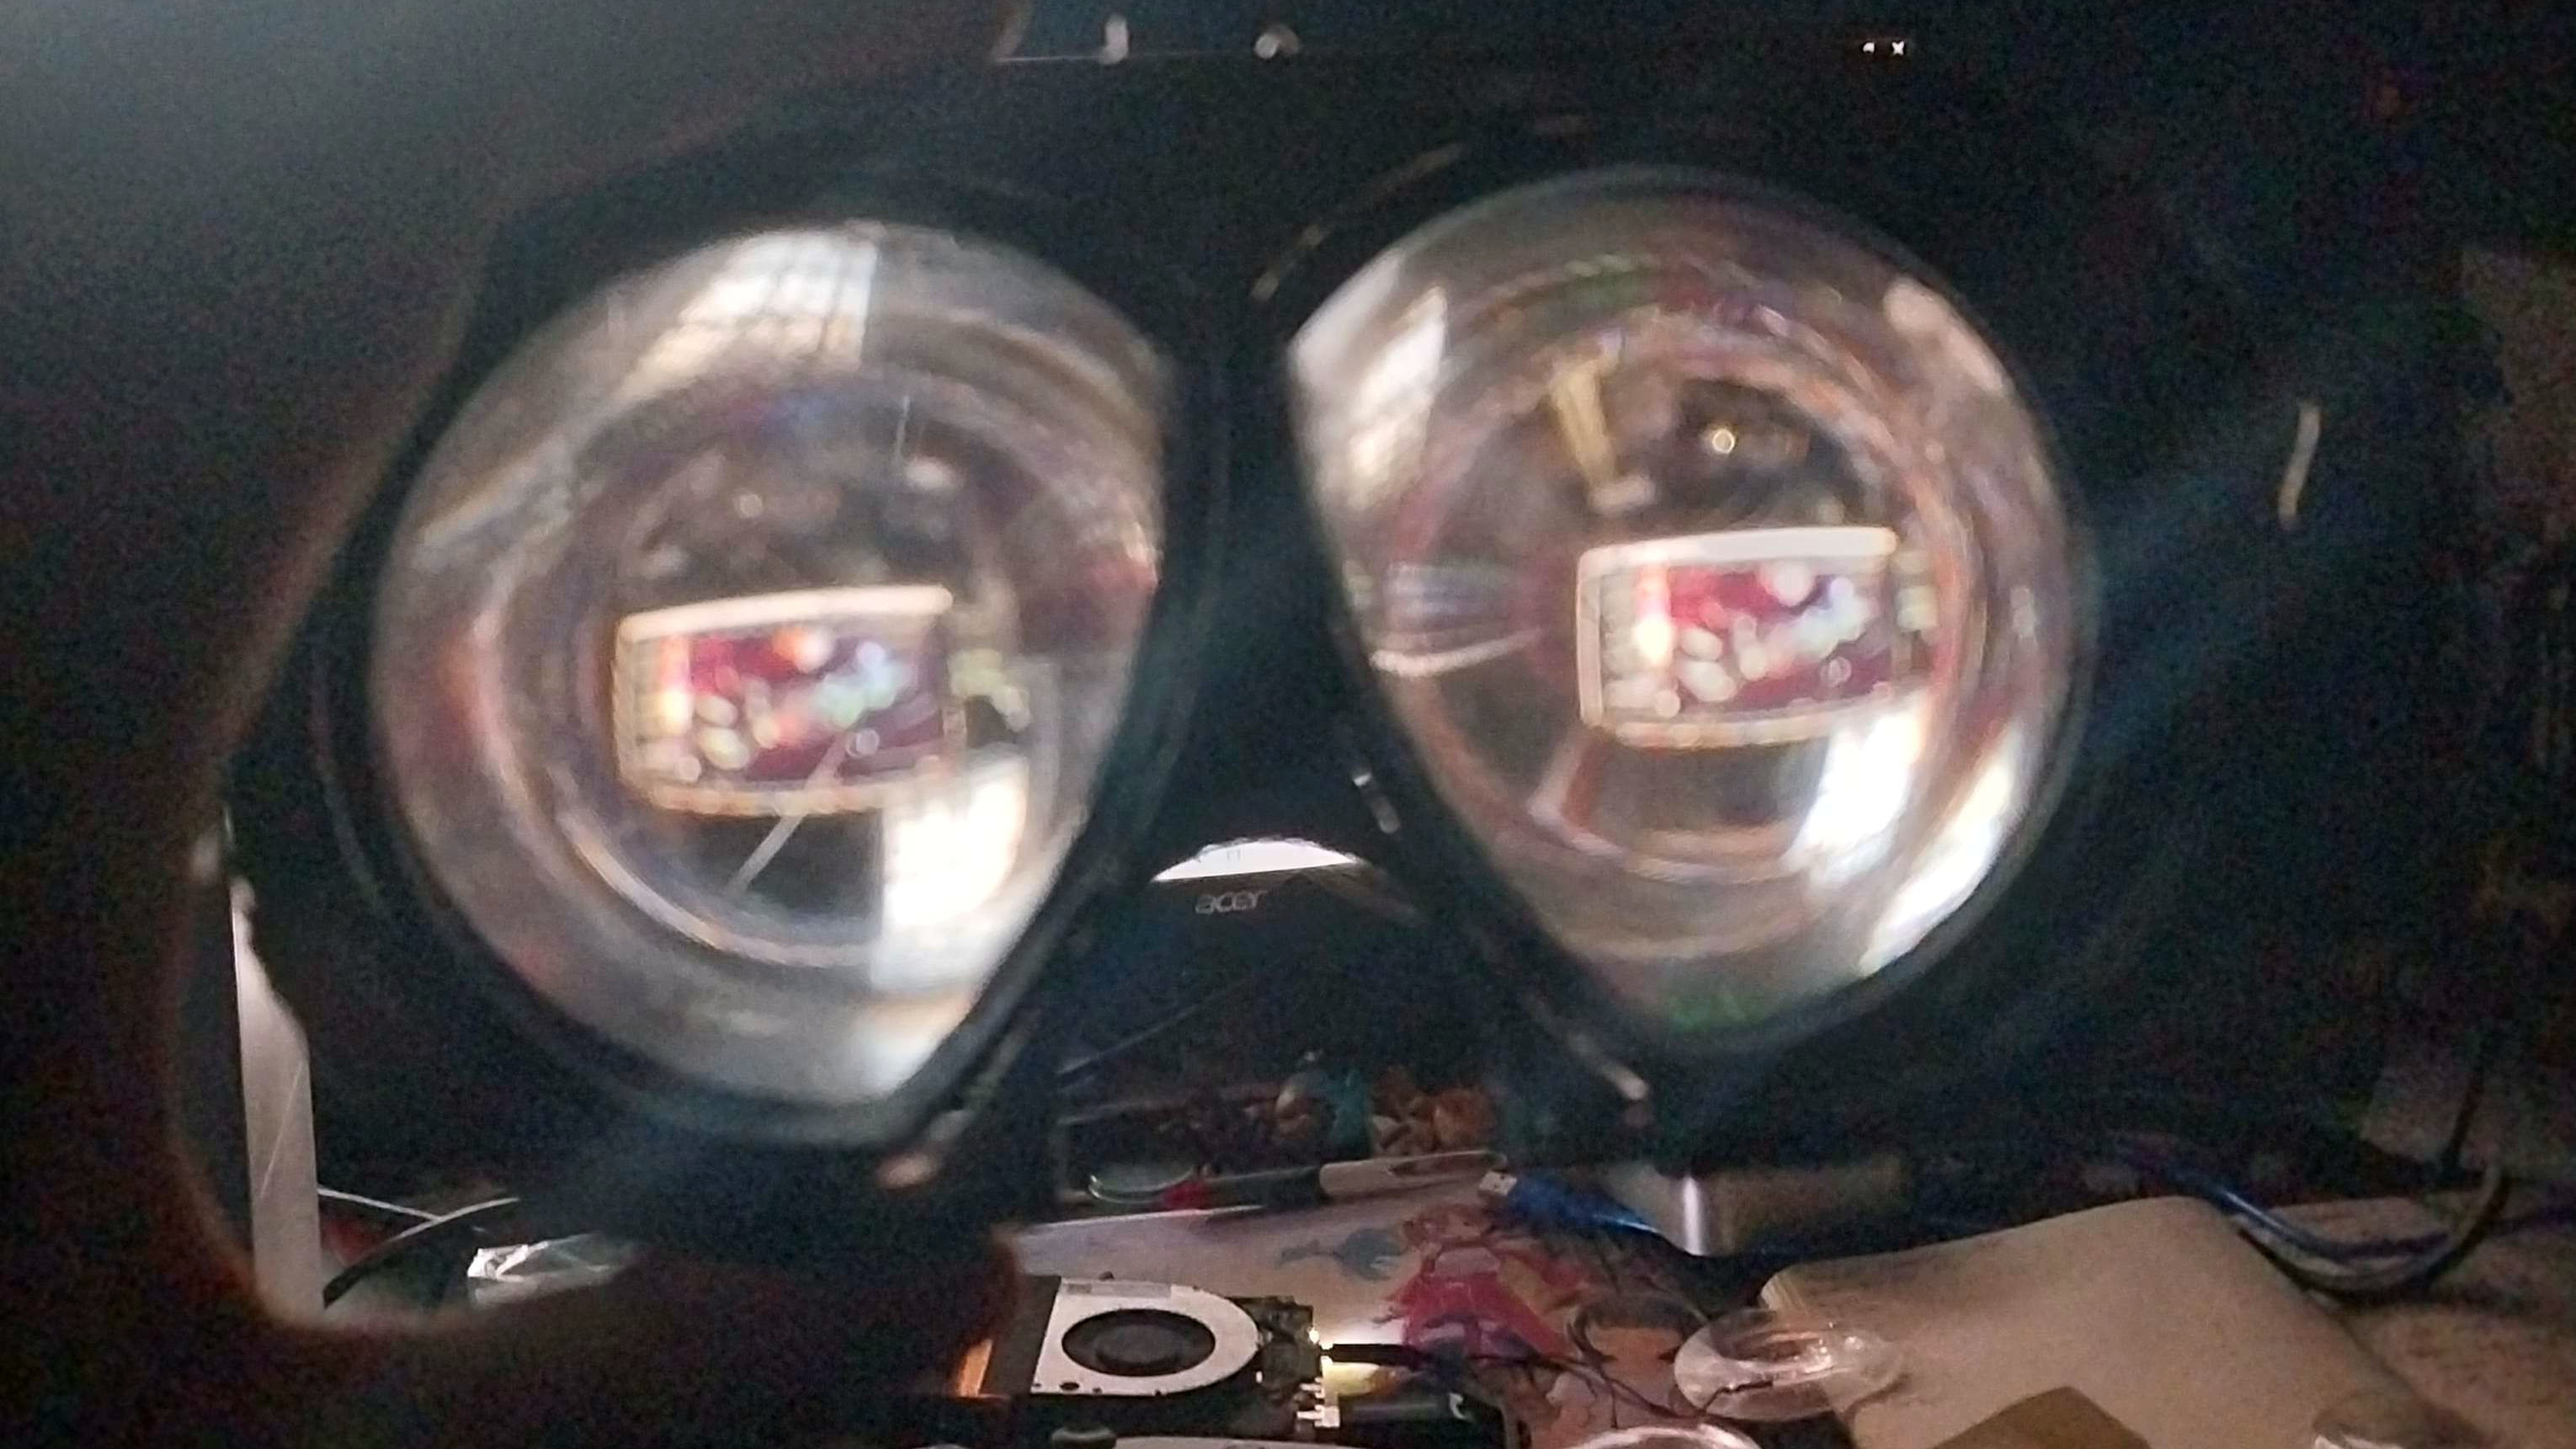 Making Your Own VR Headset? Consider This DIY Lens Design